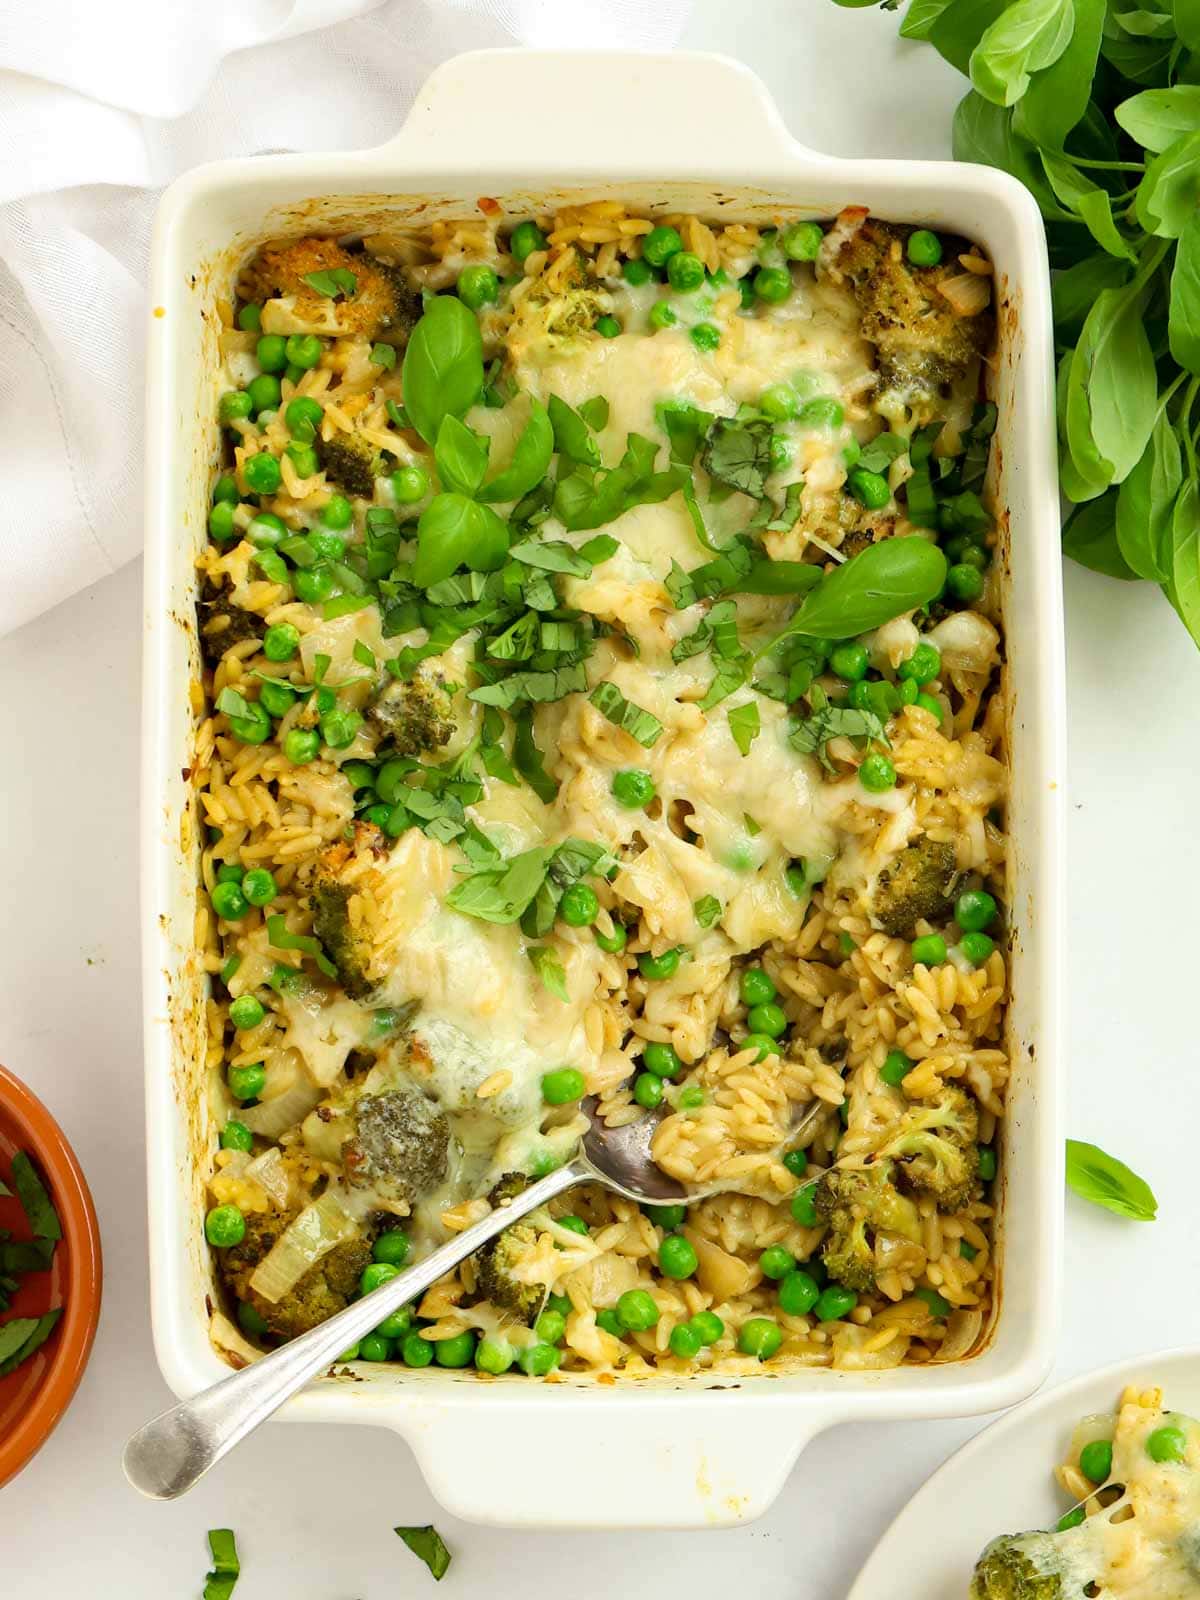 Oven dish filled with broccoli orzo pasta bake topped with cheese